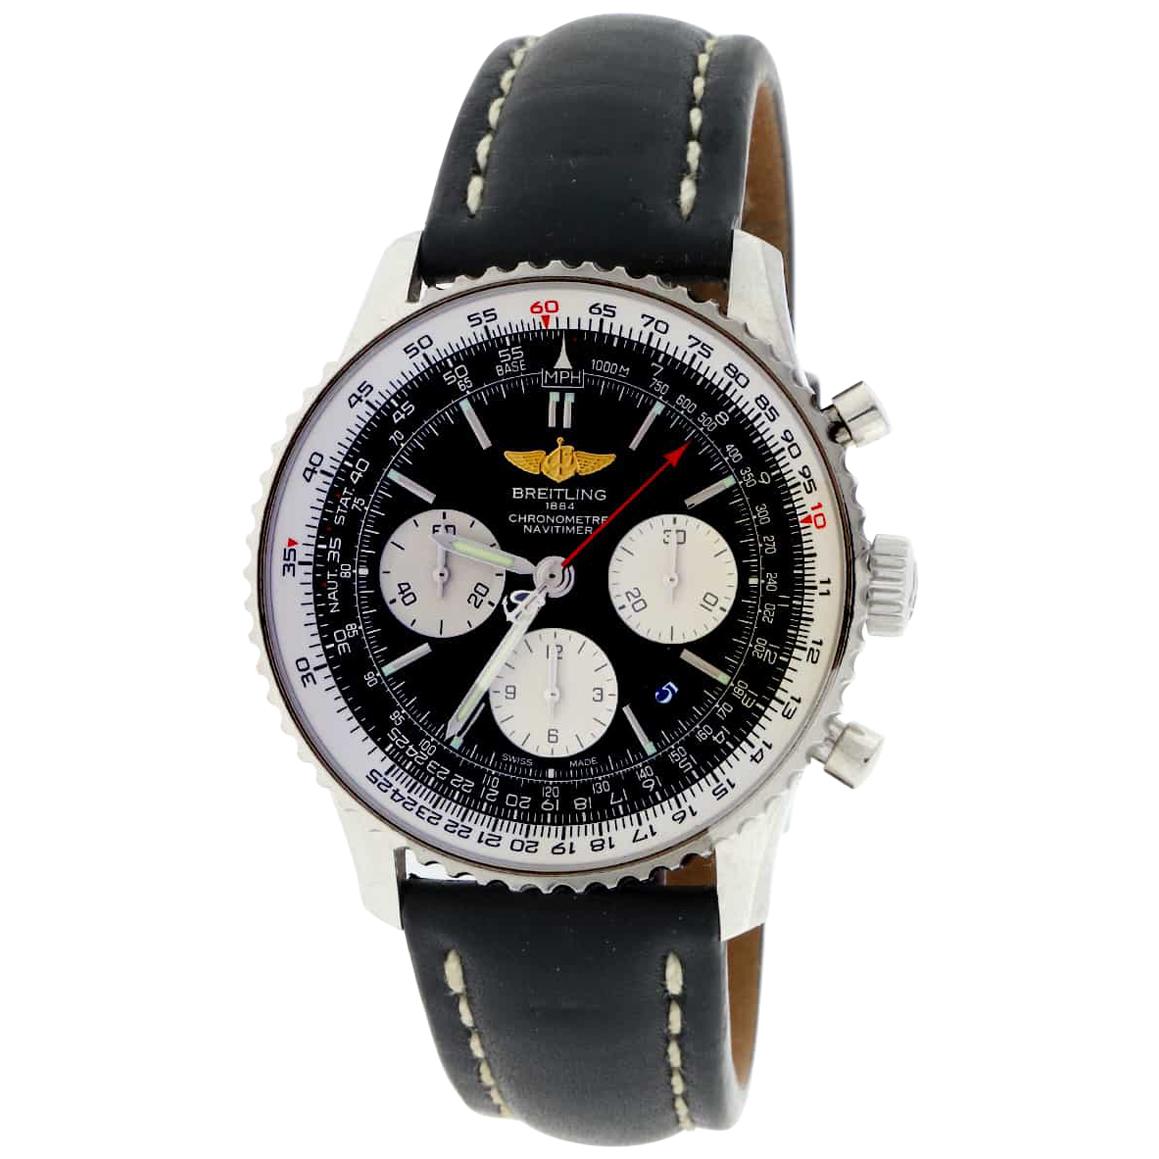 Breitling Navitimer 01 Chronograph Black Dial Automatic Watch For Sale